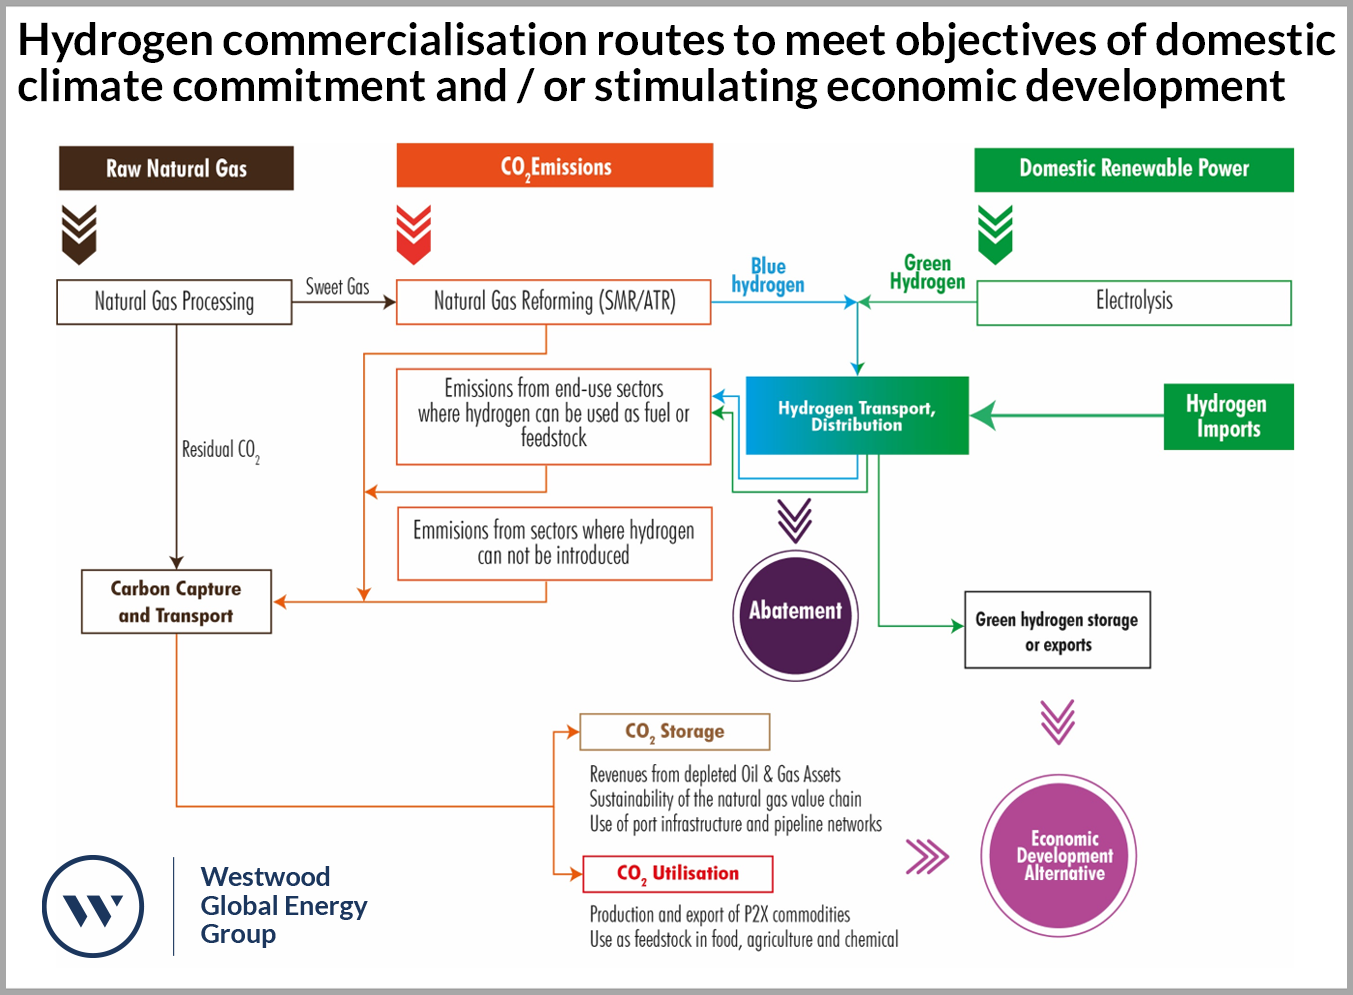 Westwood Hydrogen commercialisation routes to meet objectives of domestic